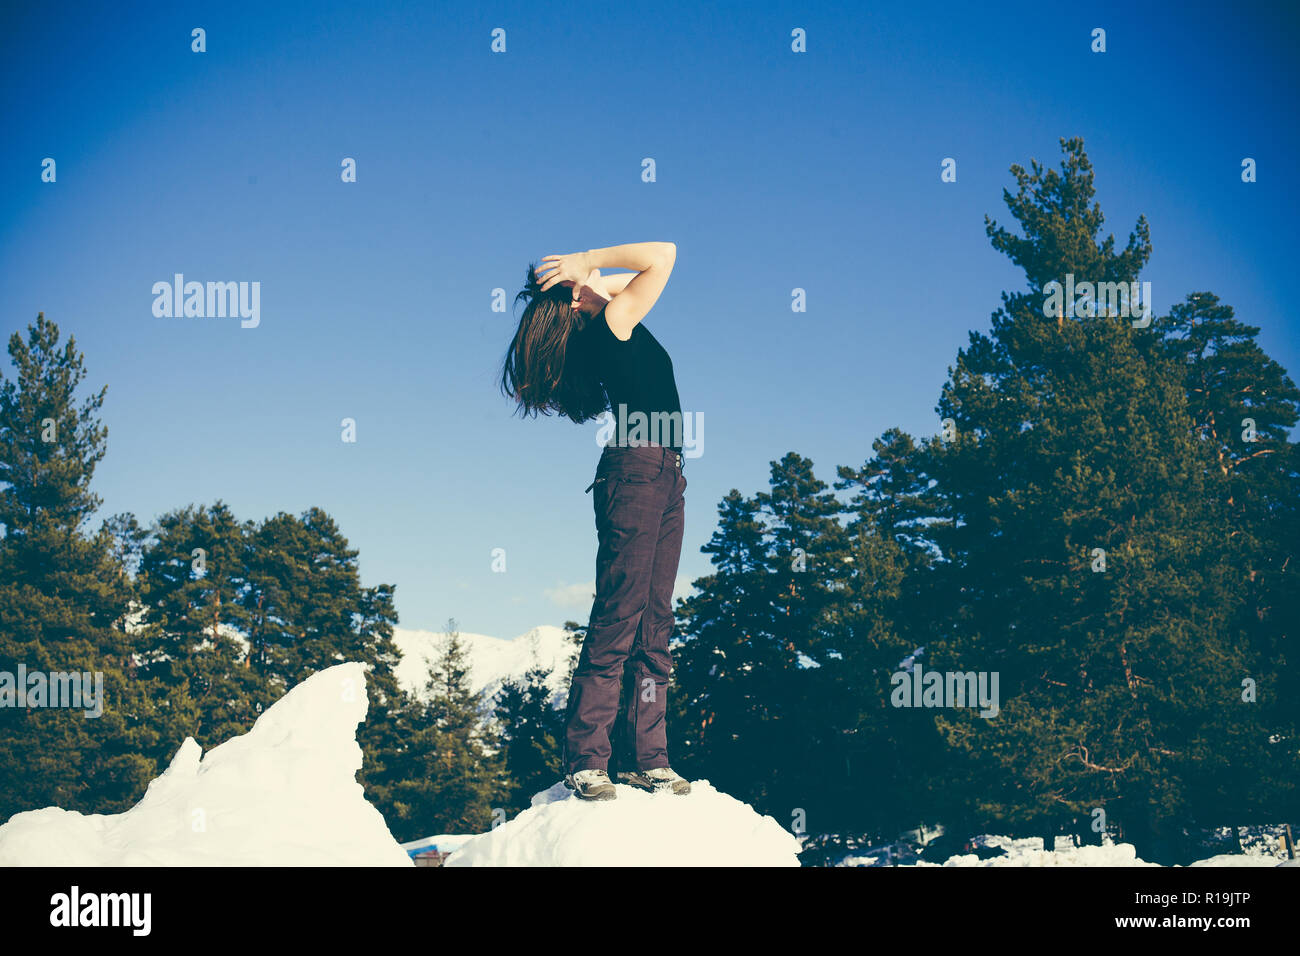 A young happy girl is standing in the snow and enjoying the sunshine. The concept of health and sports lifestyle Stock Photo